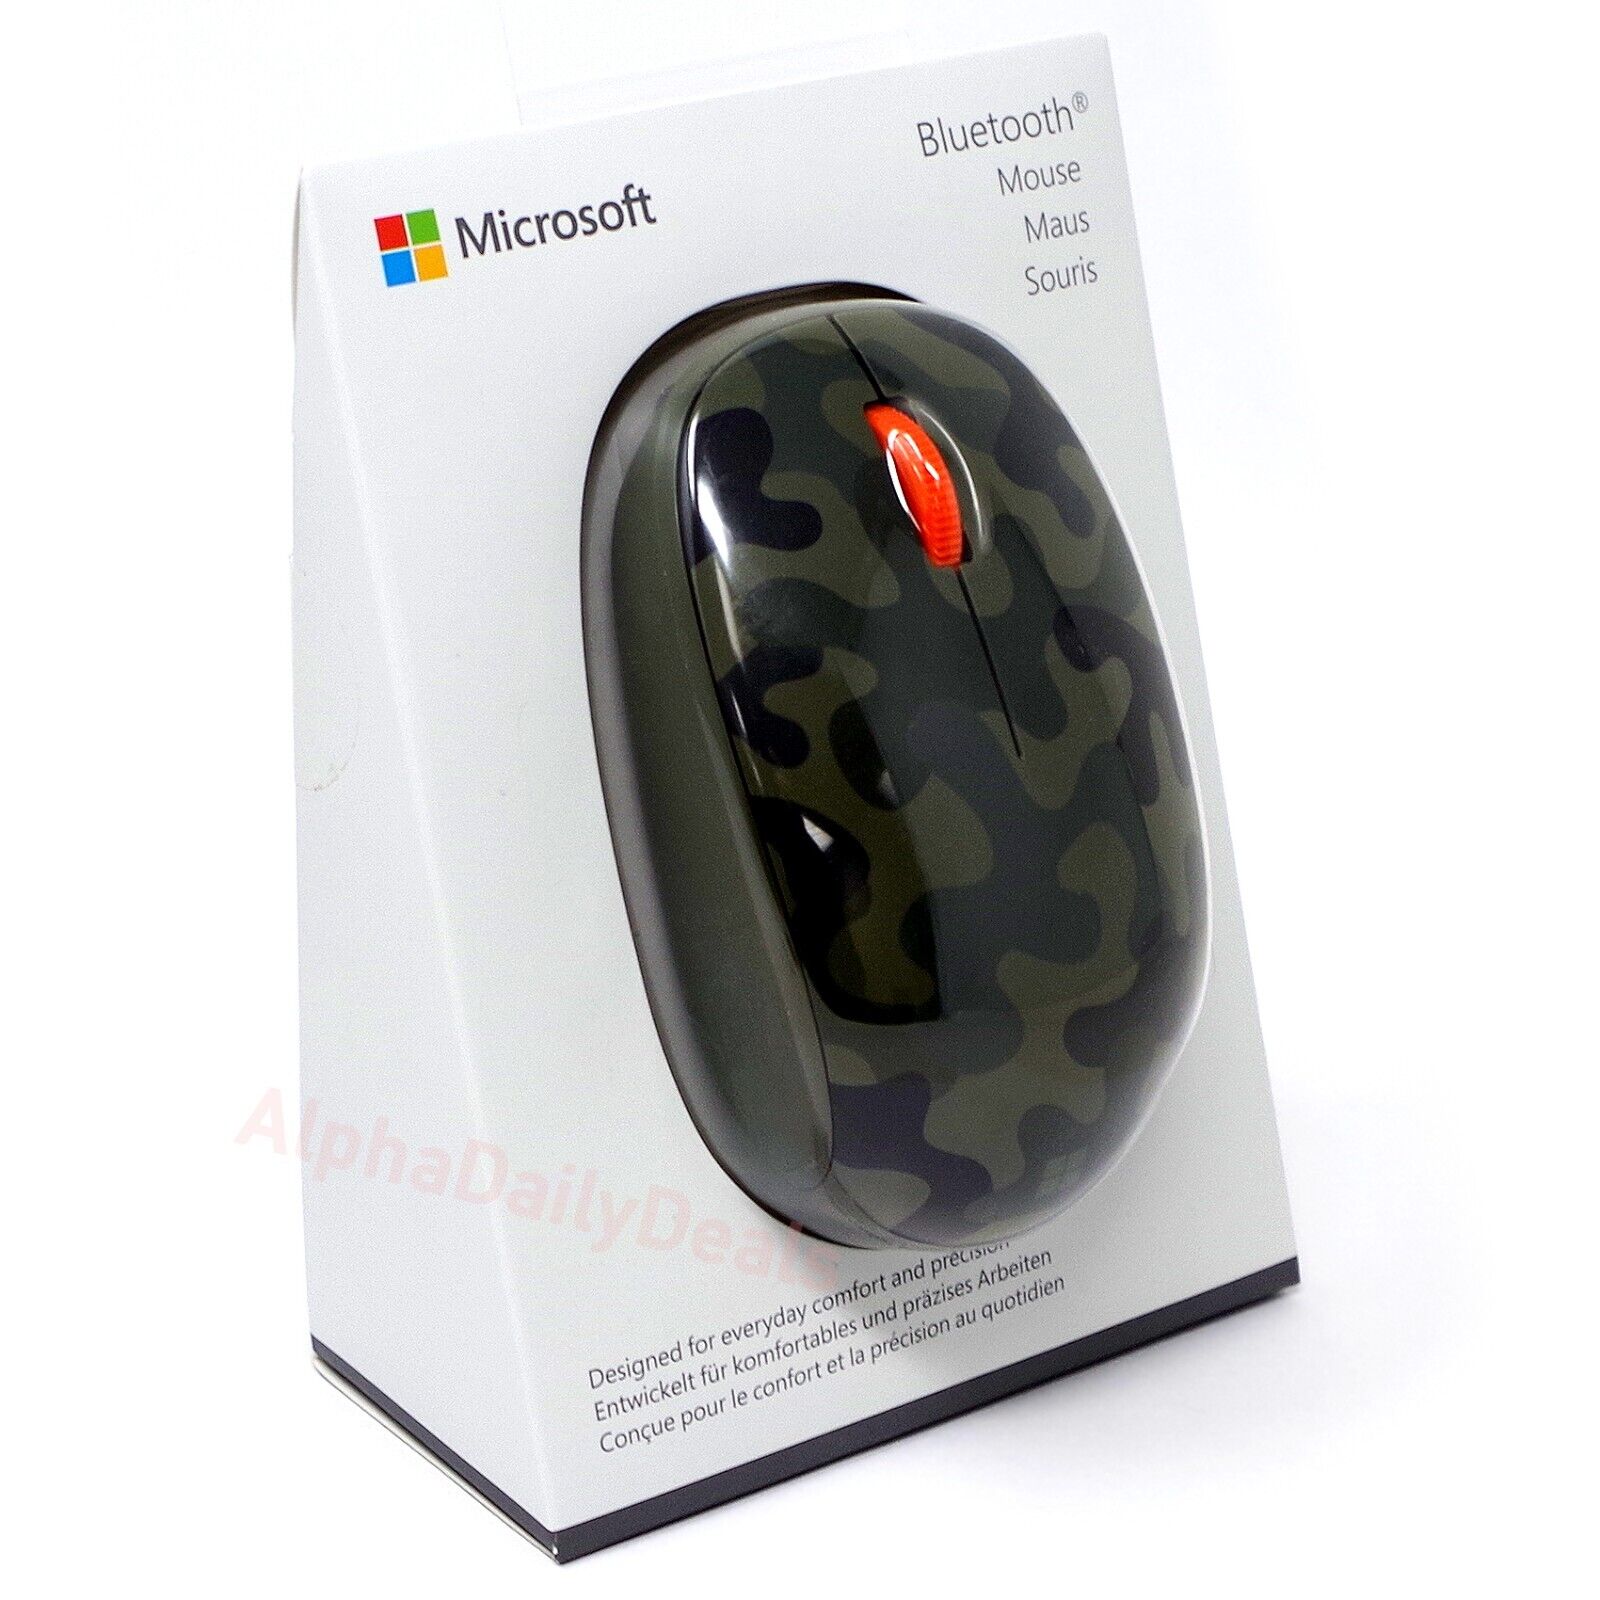 NEW Microsoft Wireless Bluetooth Optical Mouse Forest Camo Laptop PC Windows